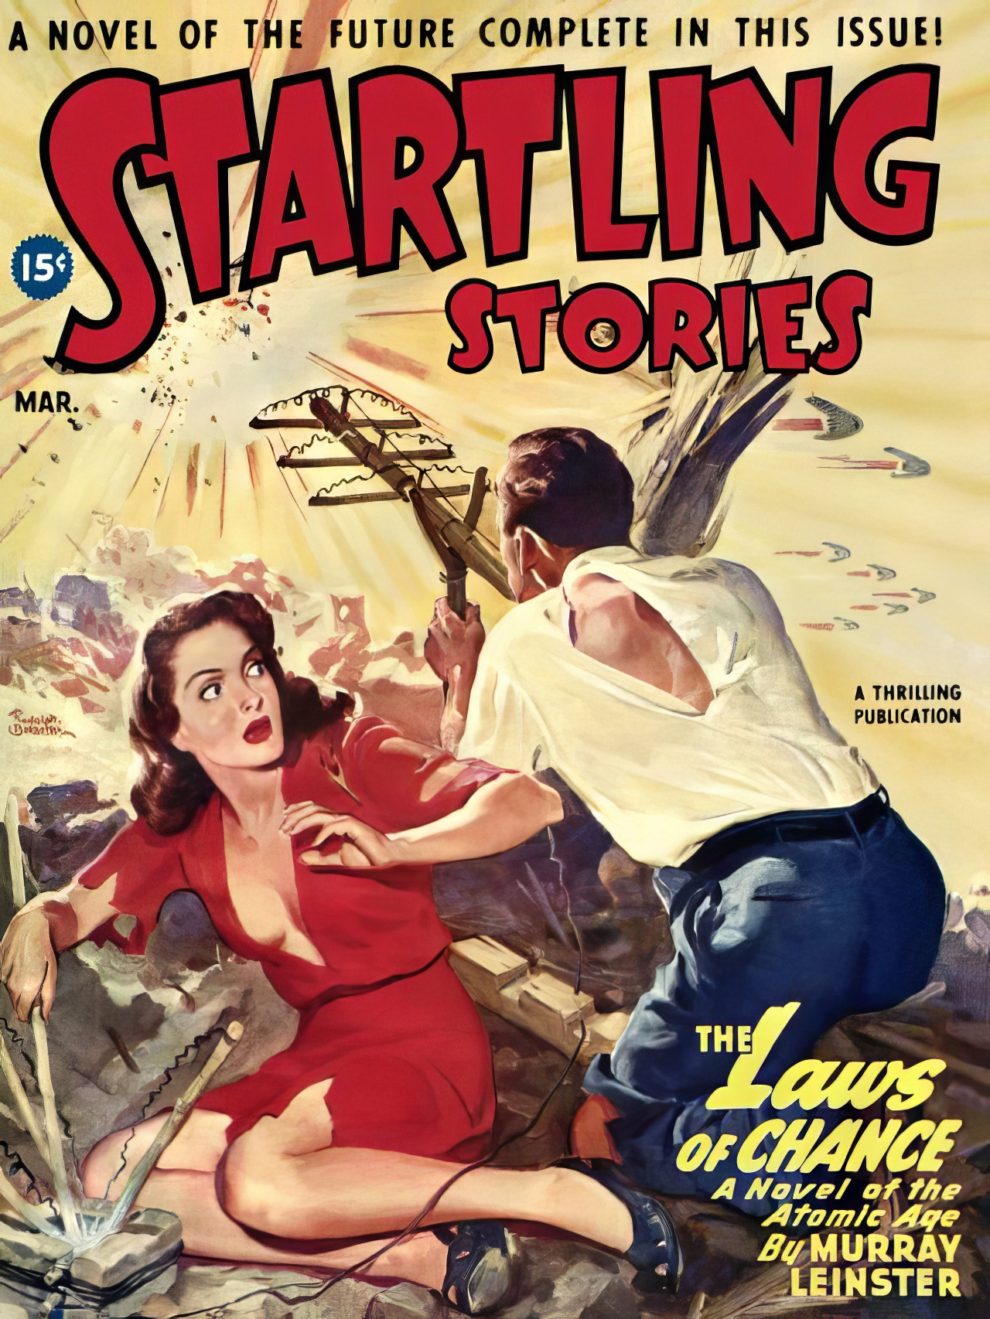 Startling Stories Covers 1940s 36 